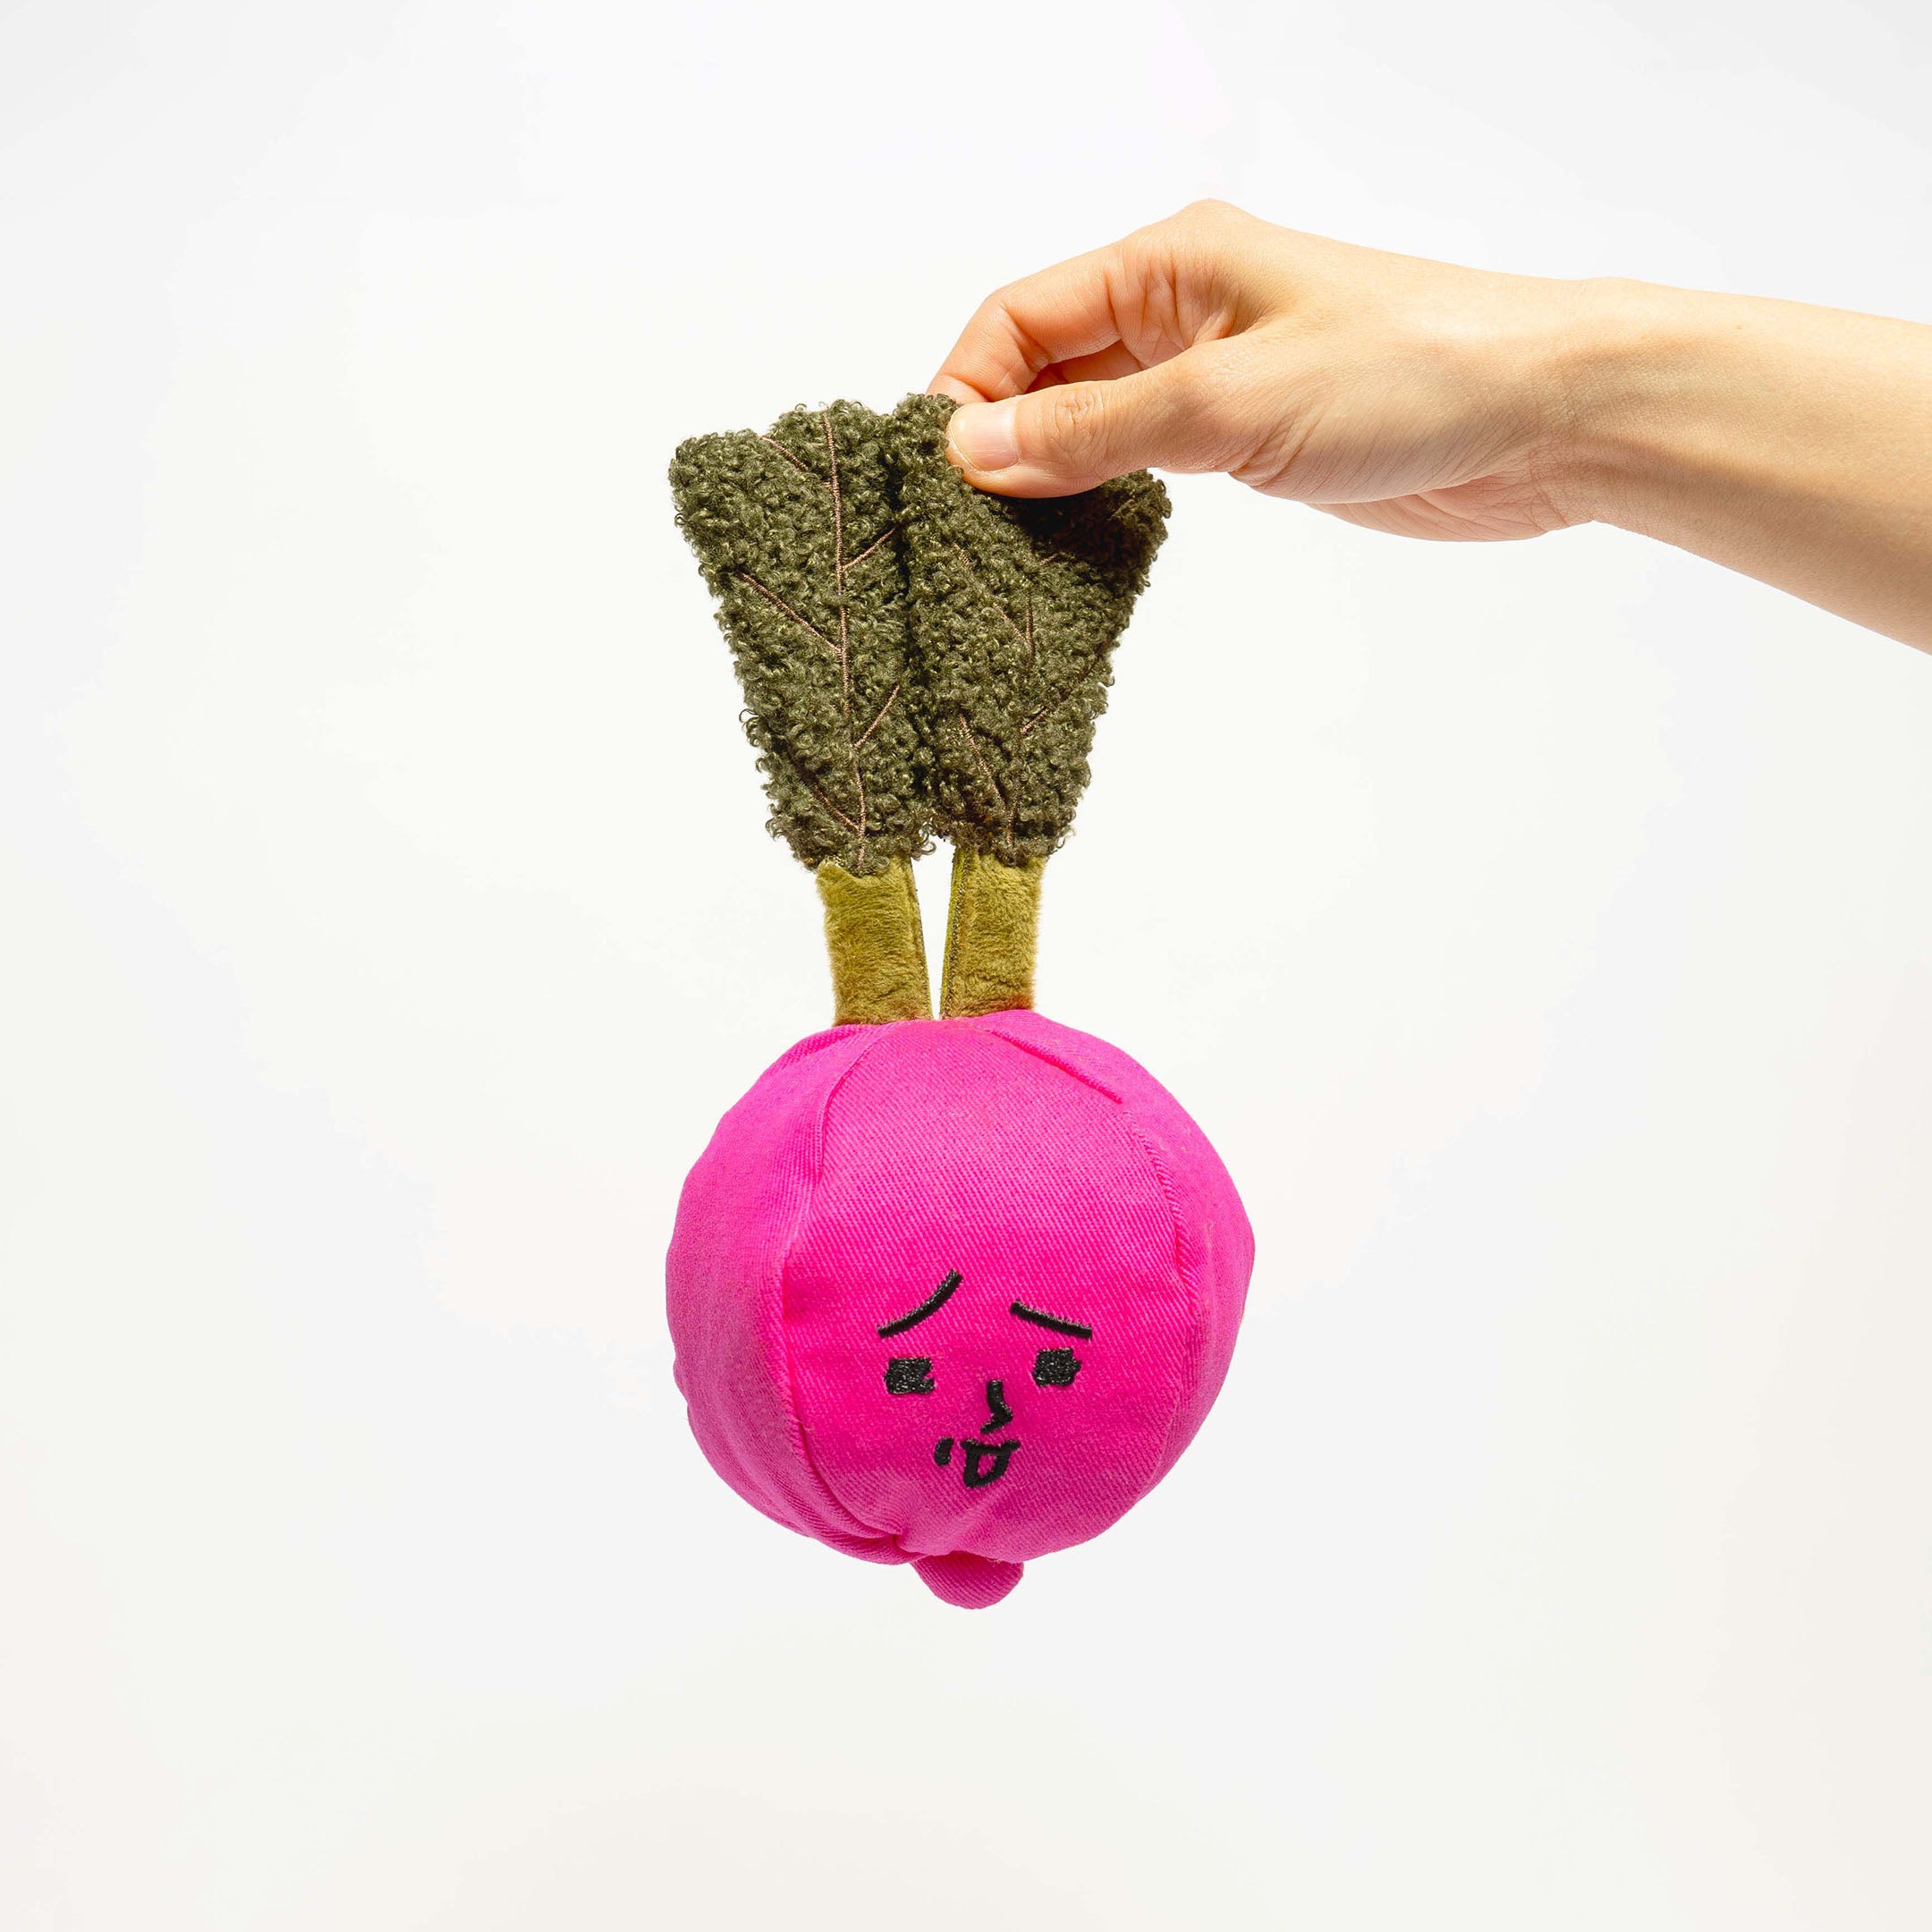 The image features a hand holding a unique dog toy shaped like a radish. The toy has a bright pink bulb with a cute, sleepy face embroidered on it and green fabric leaves that mimic the appearance of a real radish top. The texture of the leaves looks soft and is likely designed for a dog's tactile enjoyment, while the overall shape and color of the toy make it visually appealing and easy for both dogs and owners to find during play. The white background enhances the vivid colors and detail of the toy.